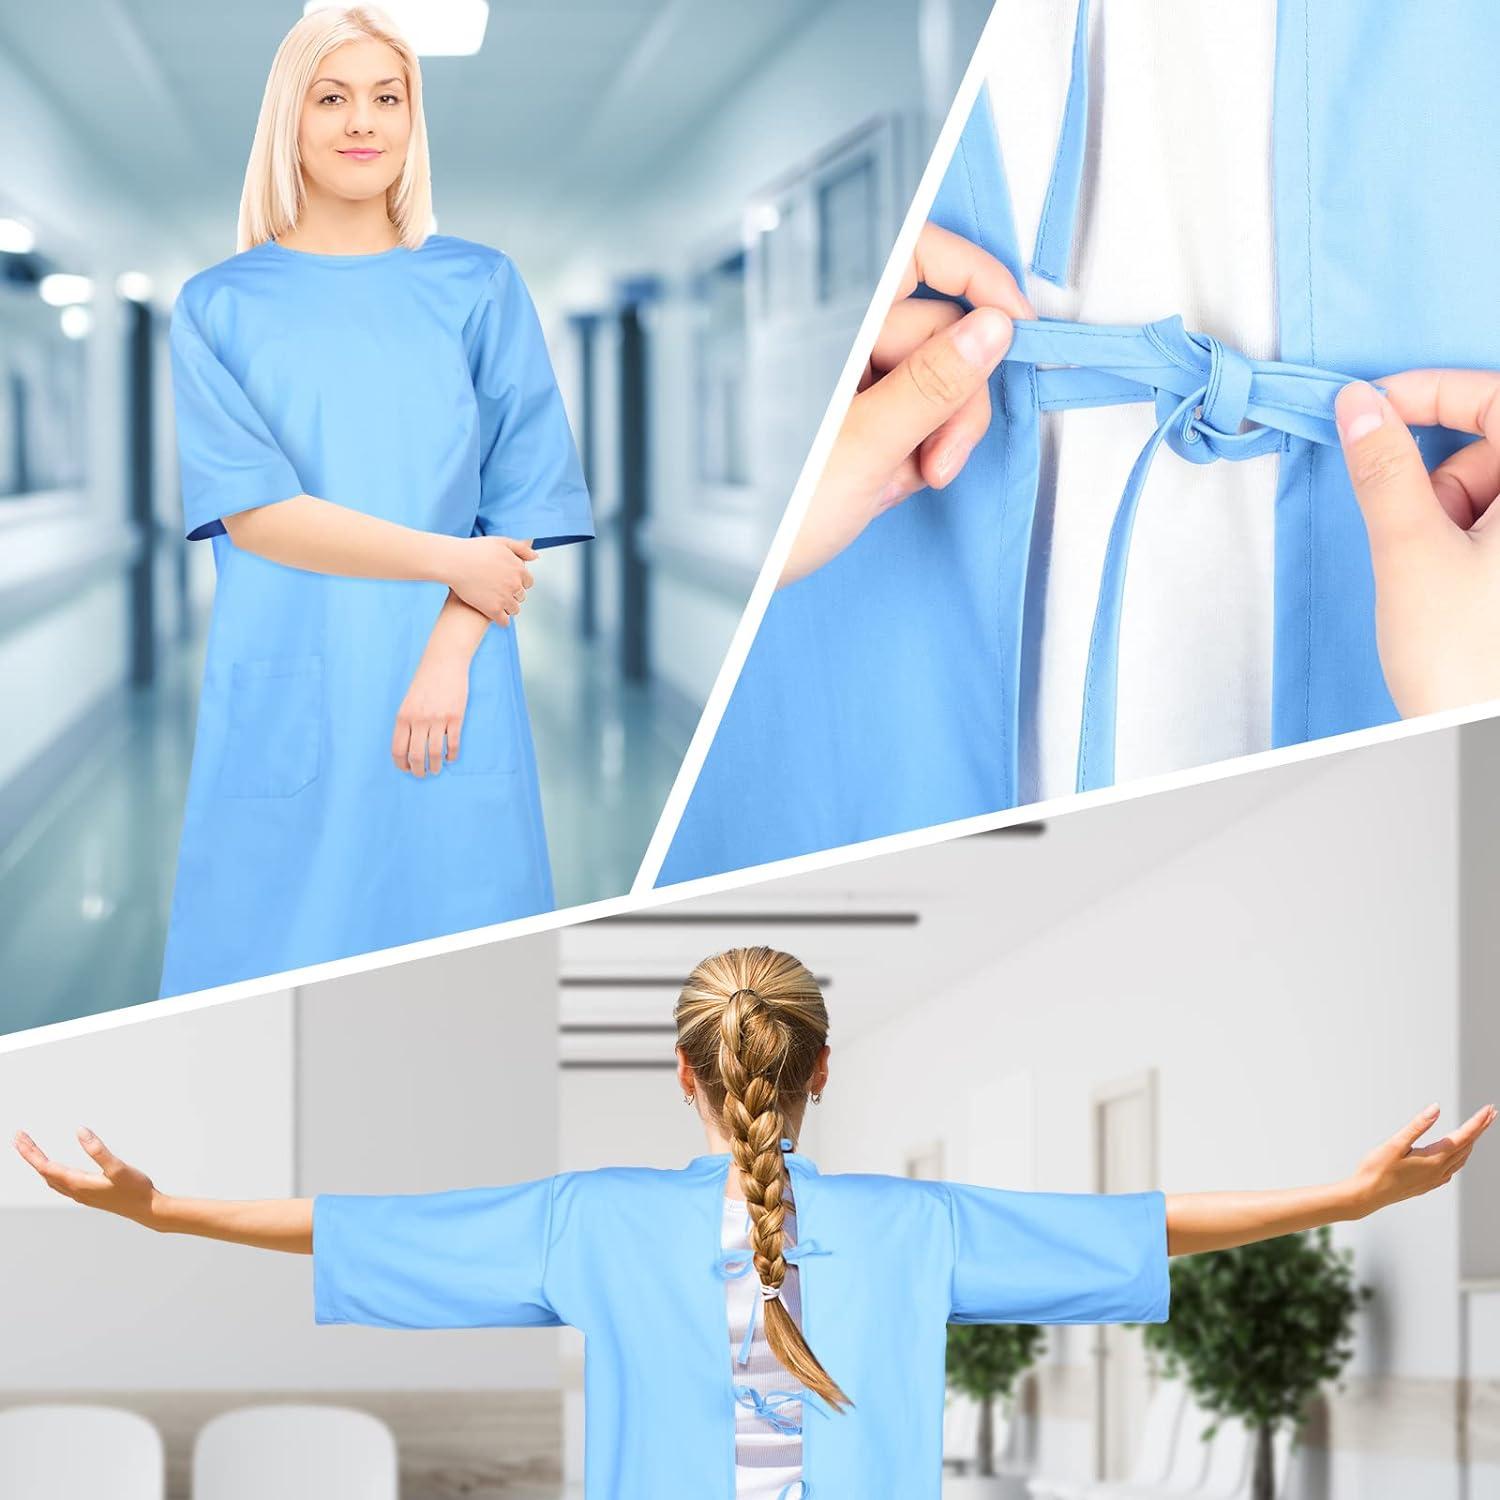 Personal Touch Tie Back Unisex Hospital Gowns - Pack of 4